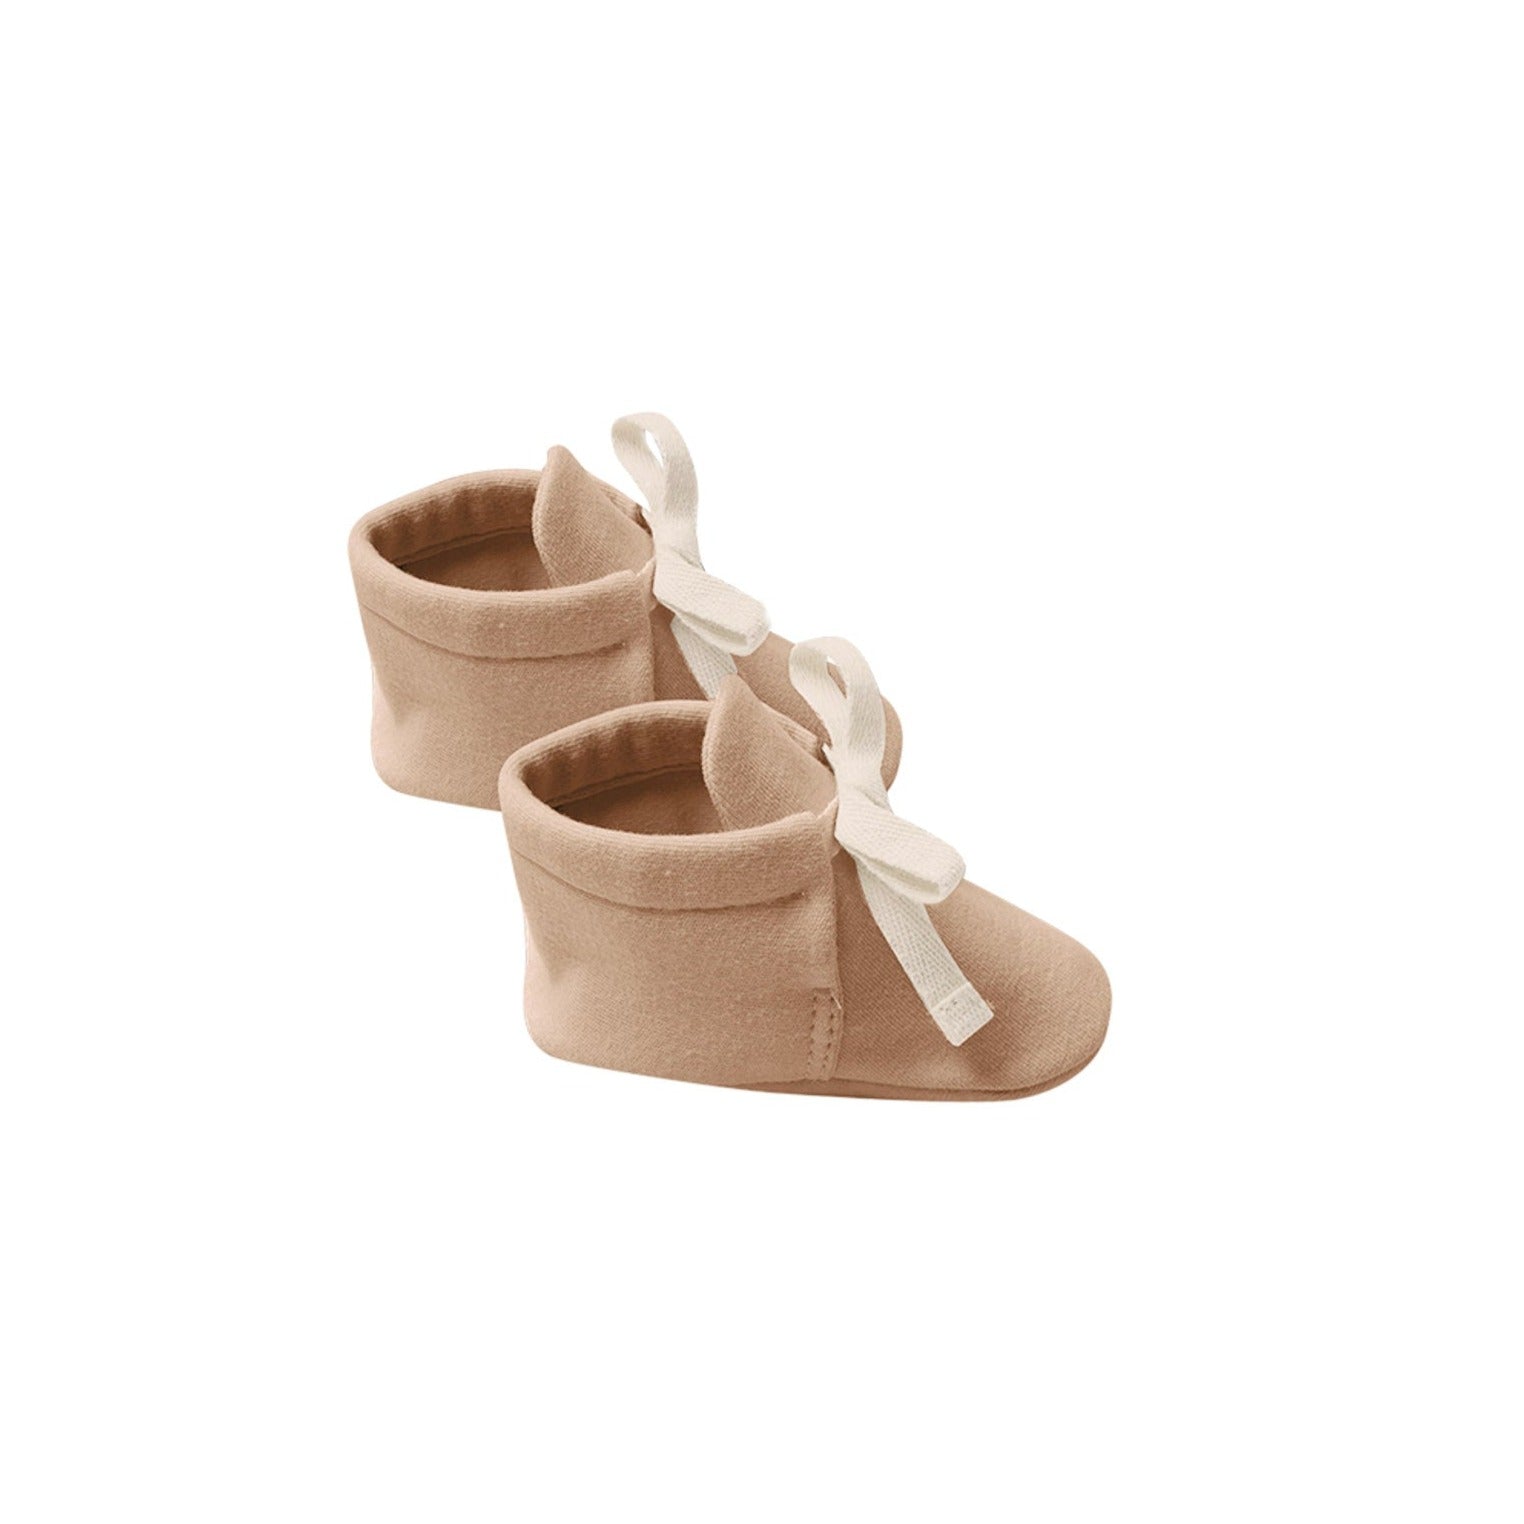 Baby Booties - Apricot